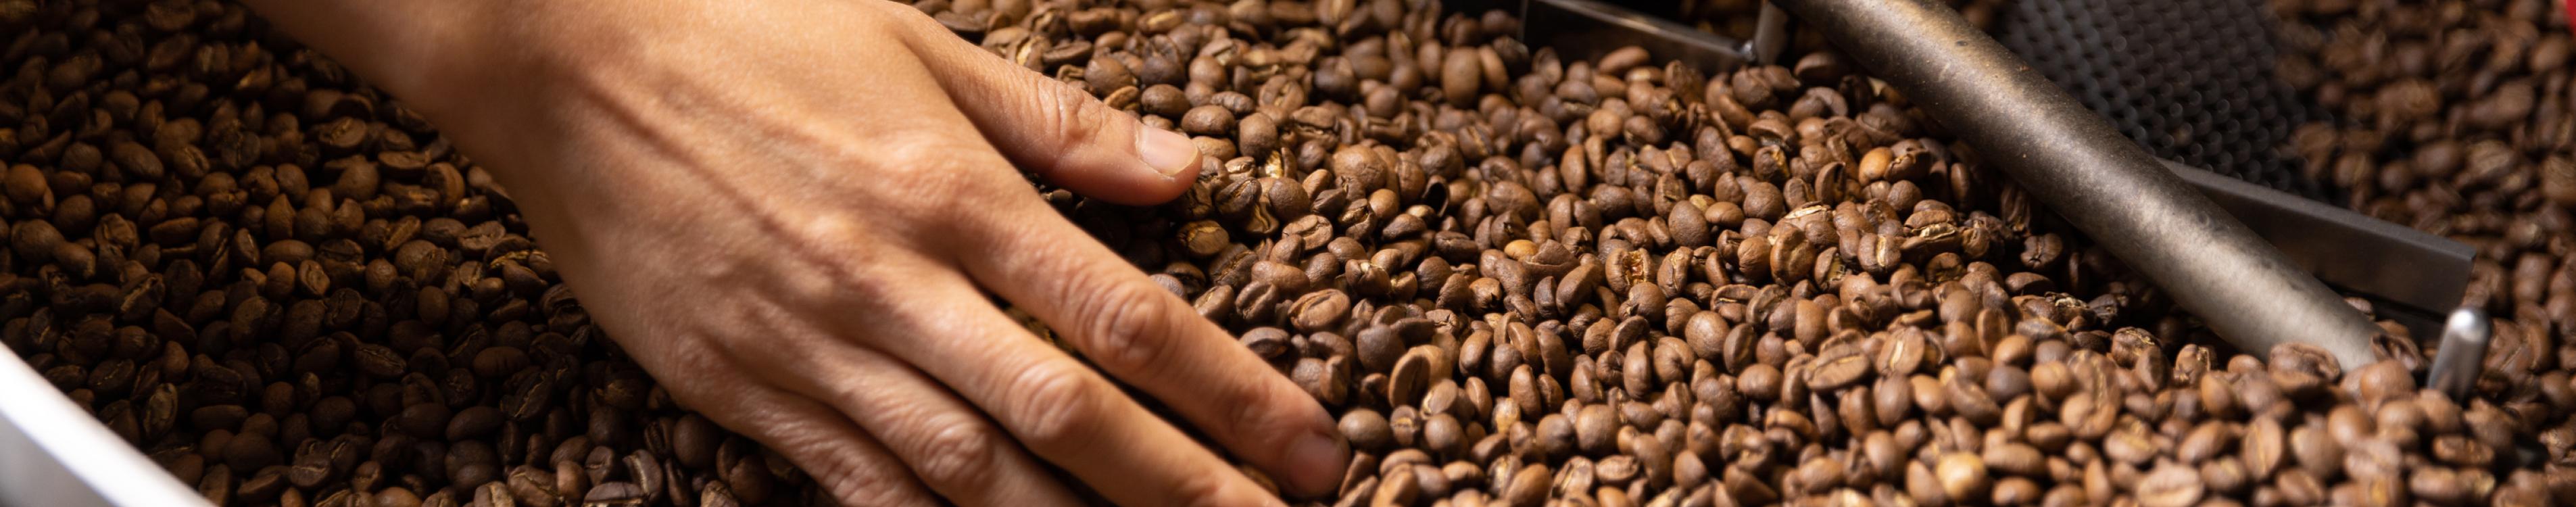 A hand reaches into a pile of roasted coffee beans.